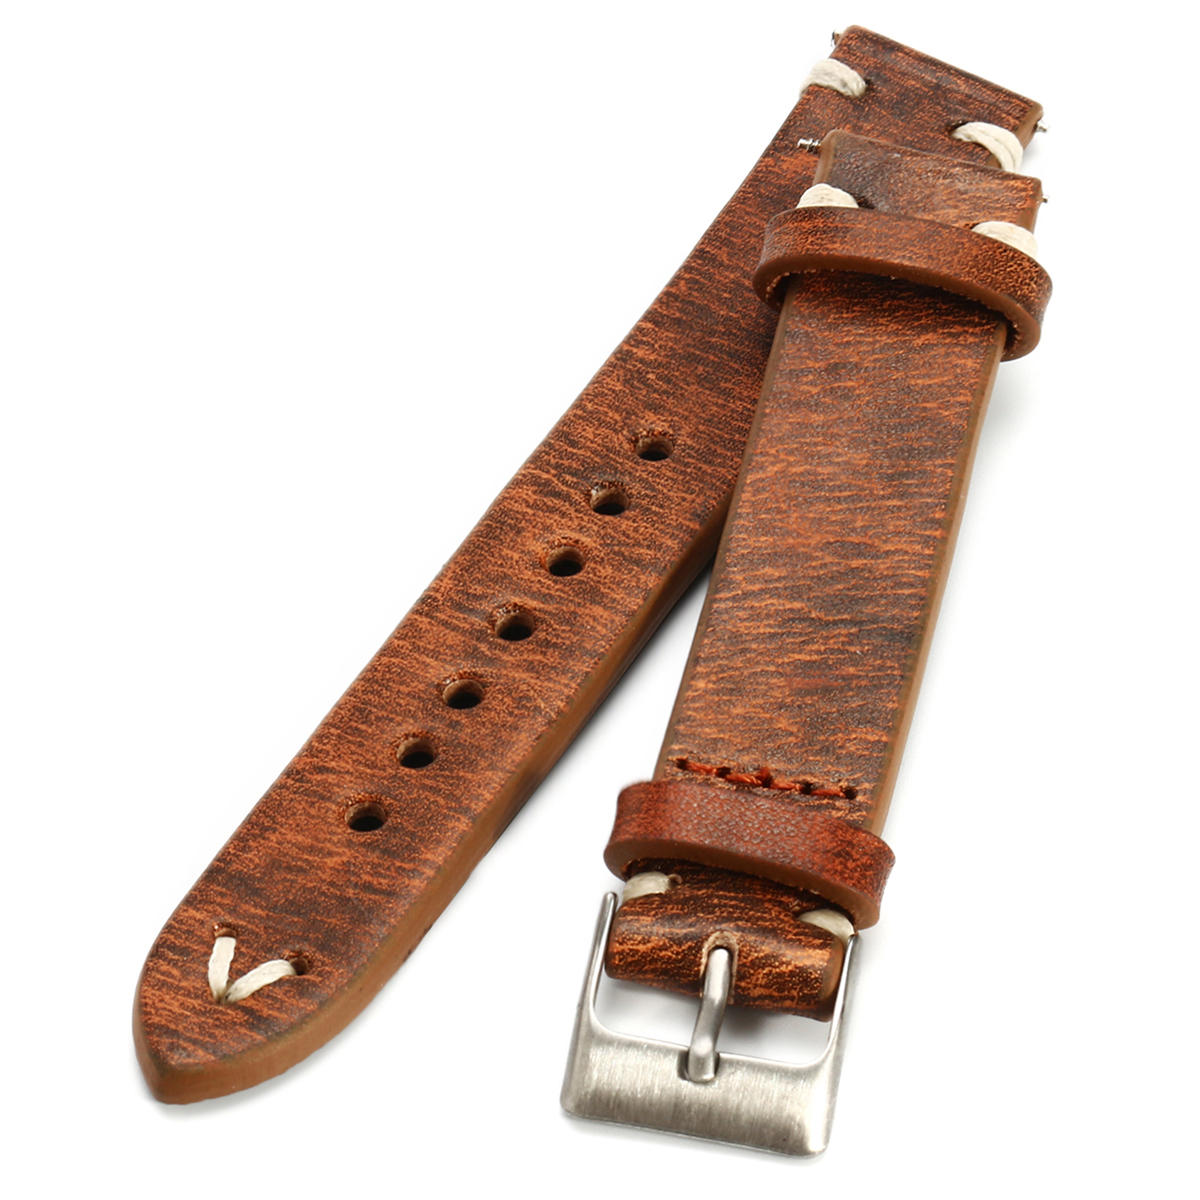 Straps Vintage Style Distressed Leather Wome/Men Watch Band Strap with Stitching